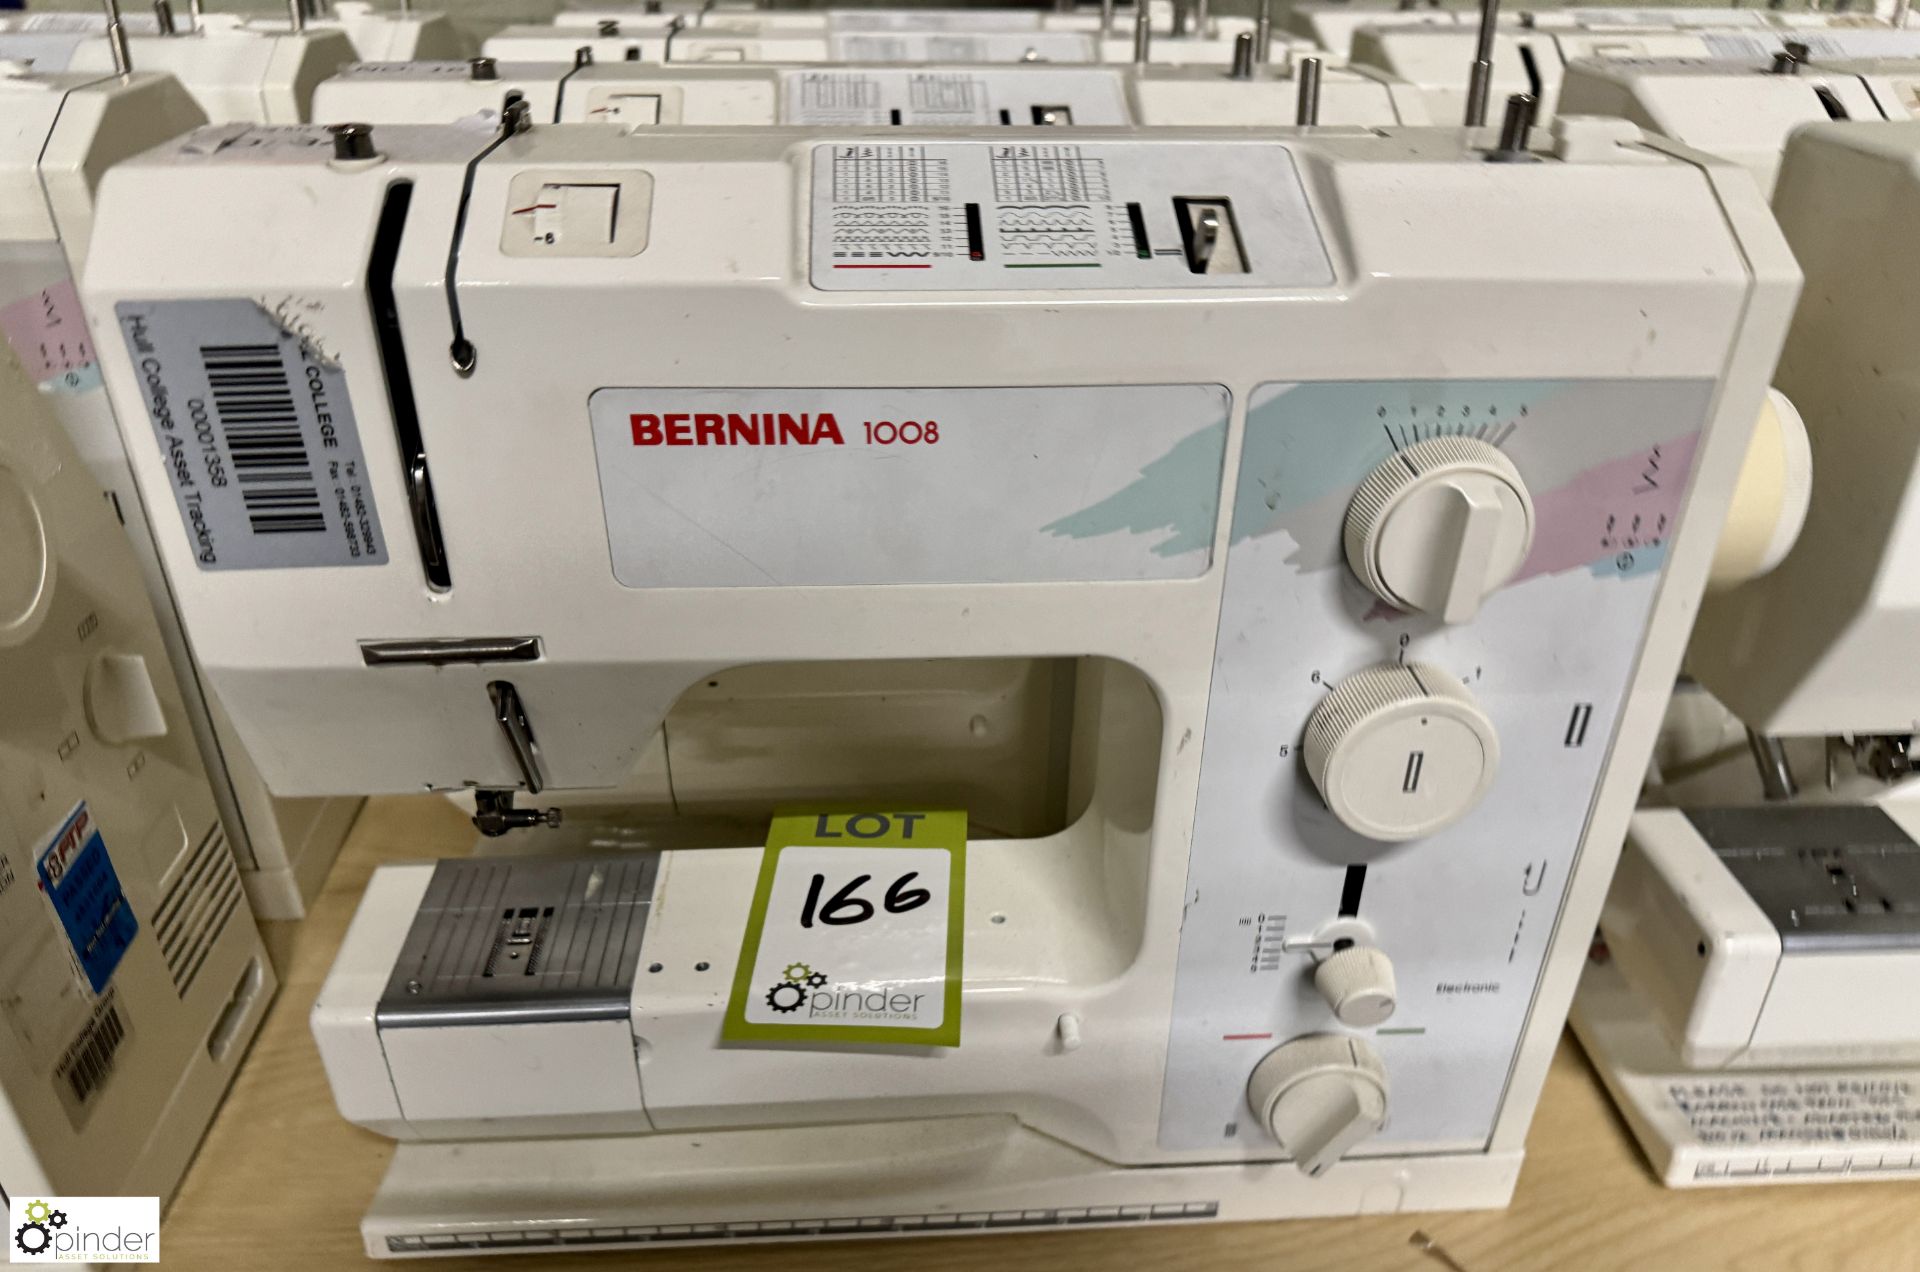 4 Bermina 1008 Domestic Lockstitch Sewing Machines, 240volts (no power leads or foot controls) - Image 3 of 5